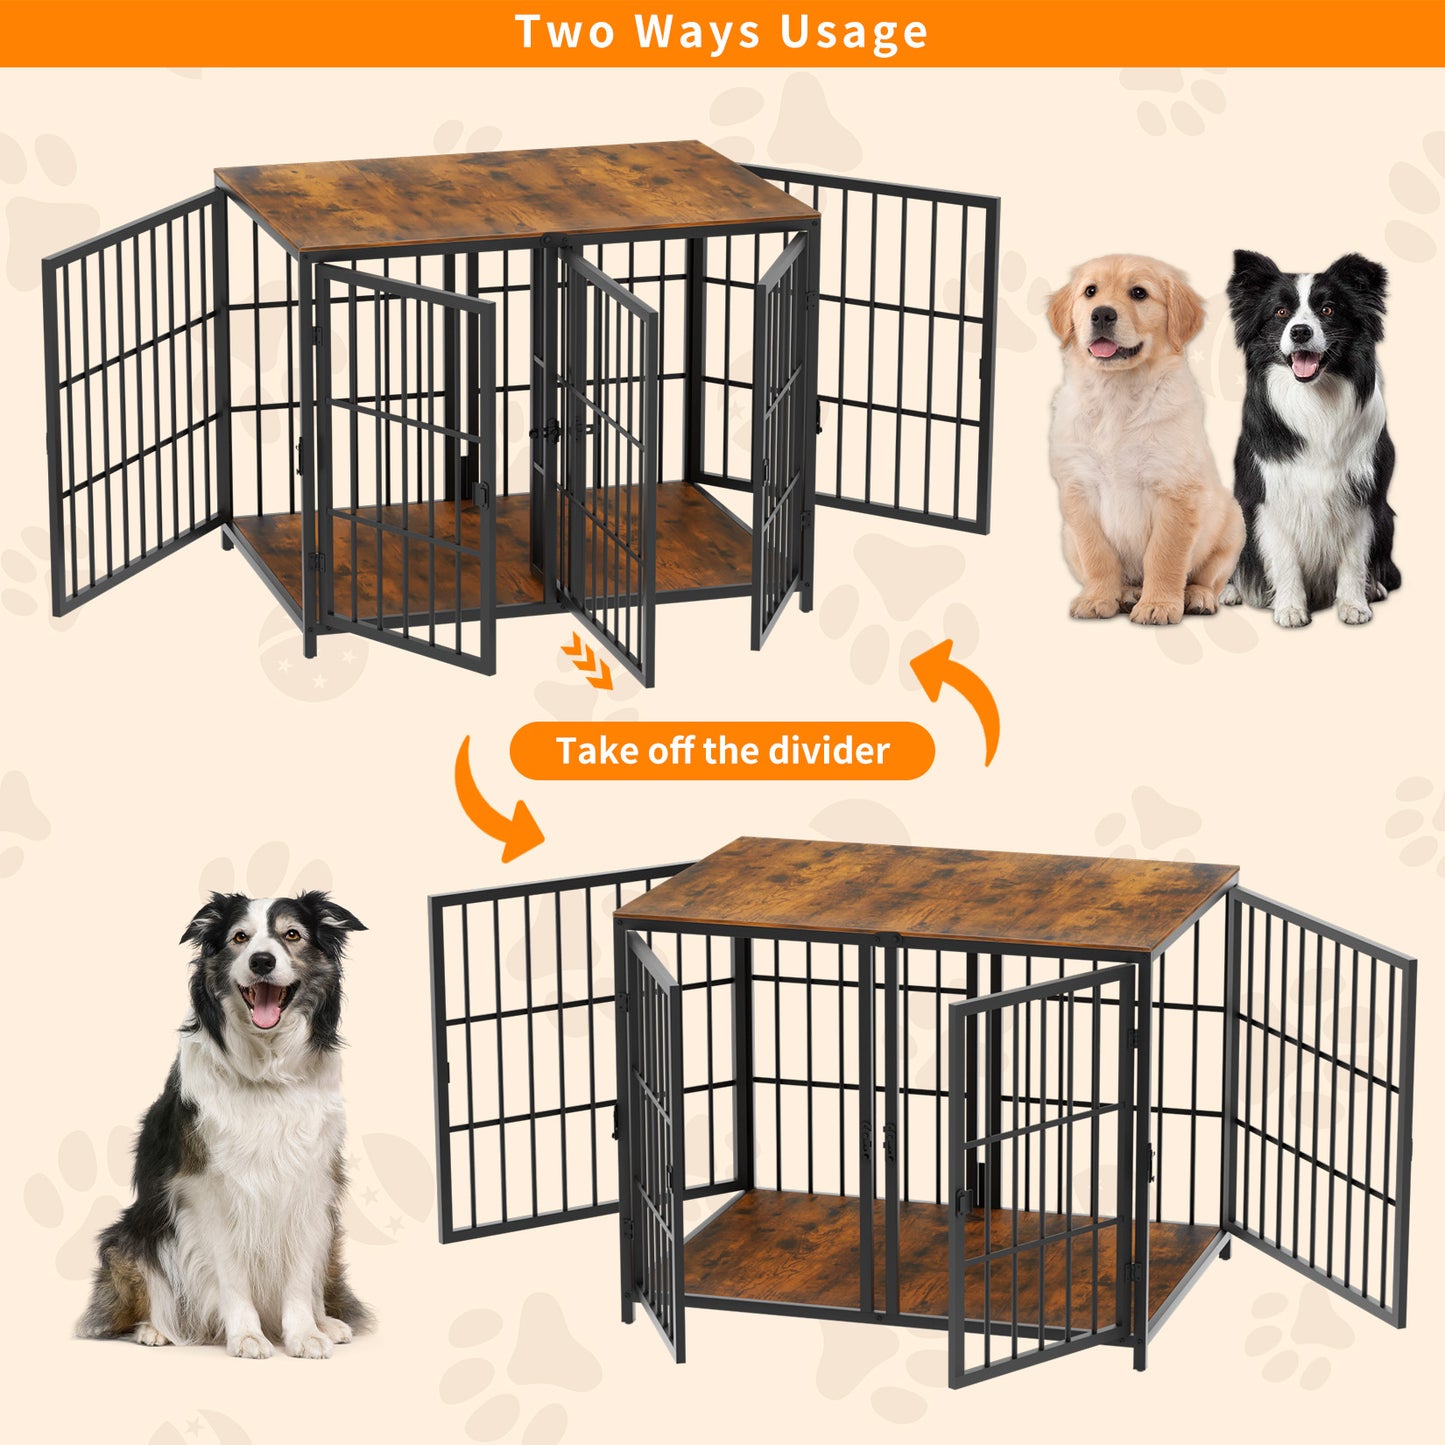 2023 Heavy Wooden Dog Crate Furniture End Table Pet Kennel Puppy Cage w Four Doors